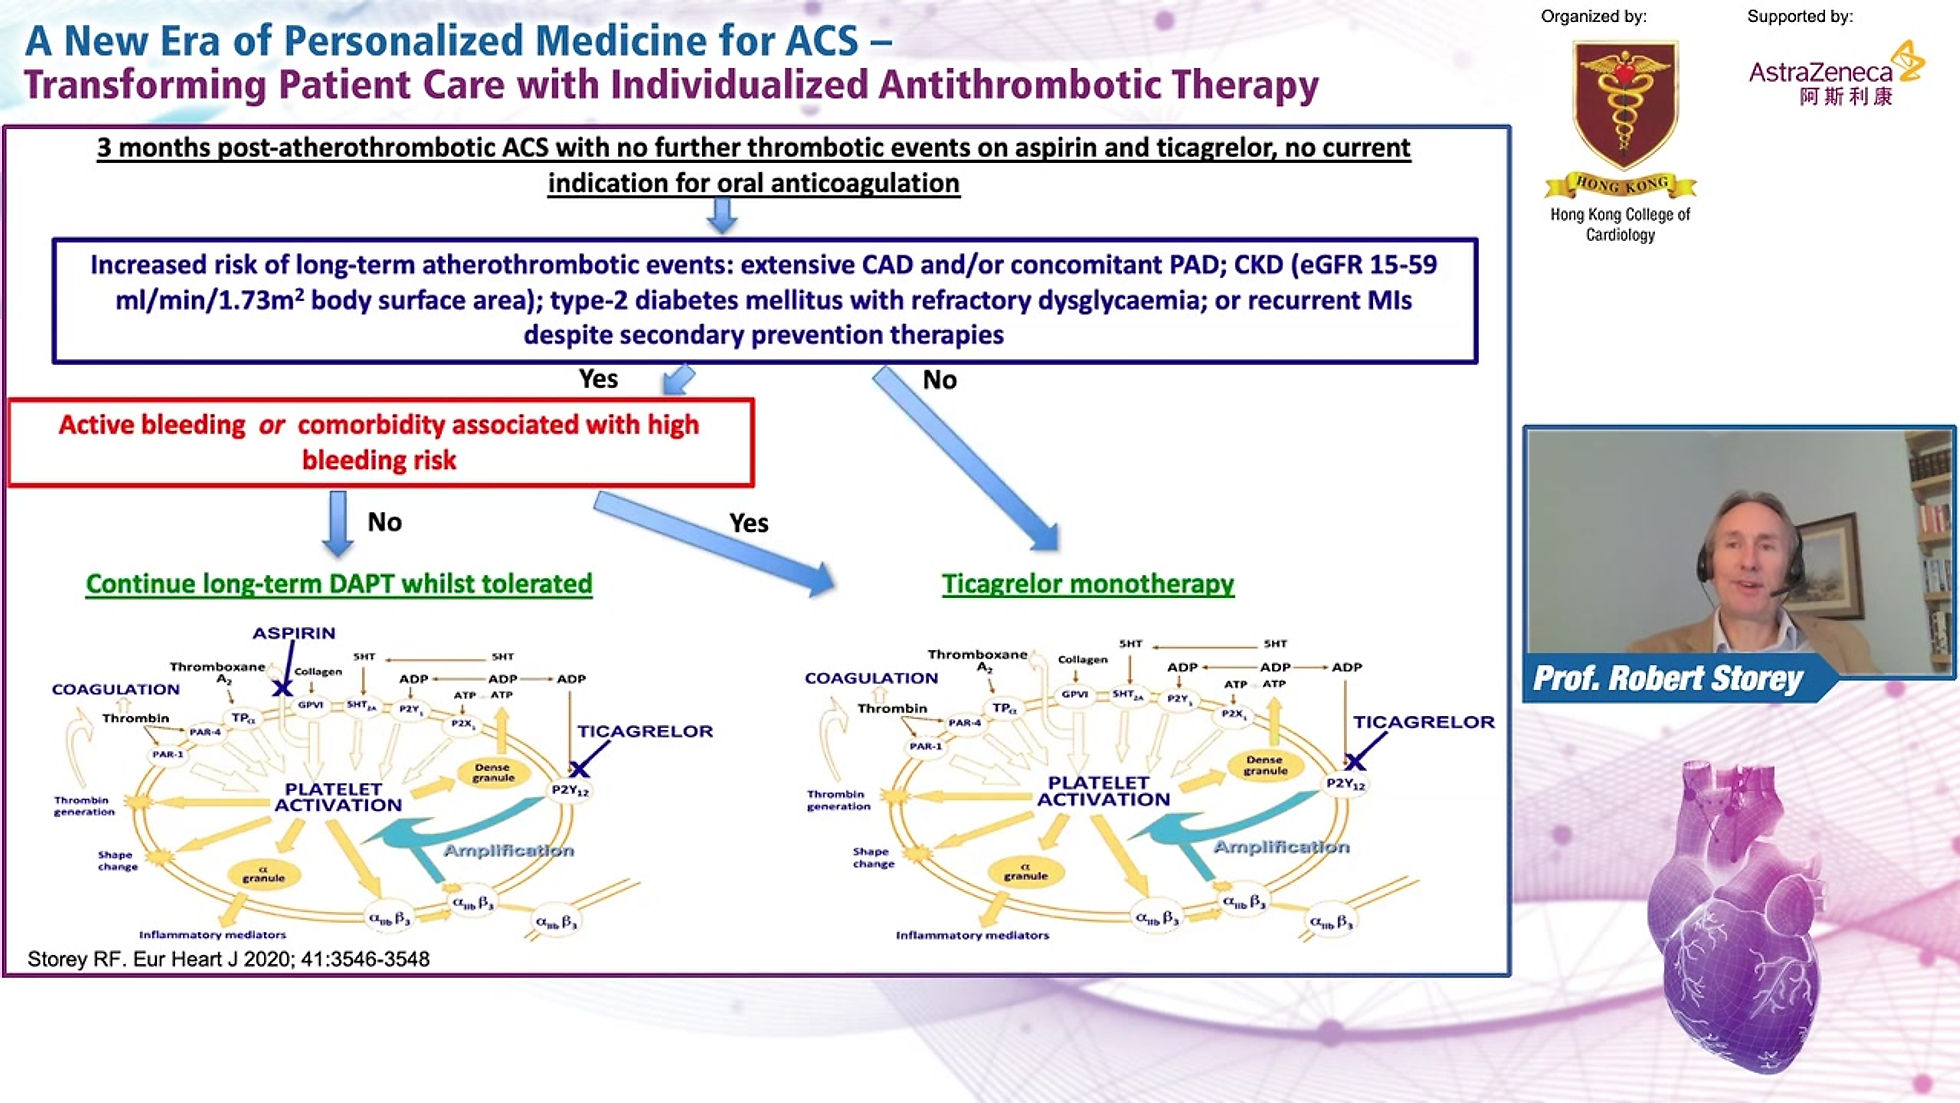 A New Era of Personalized Medicine for ACS – Transforming Patient Care with Individualized Antithrombotic Therapy